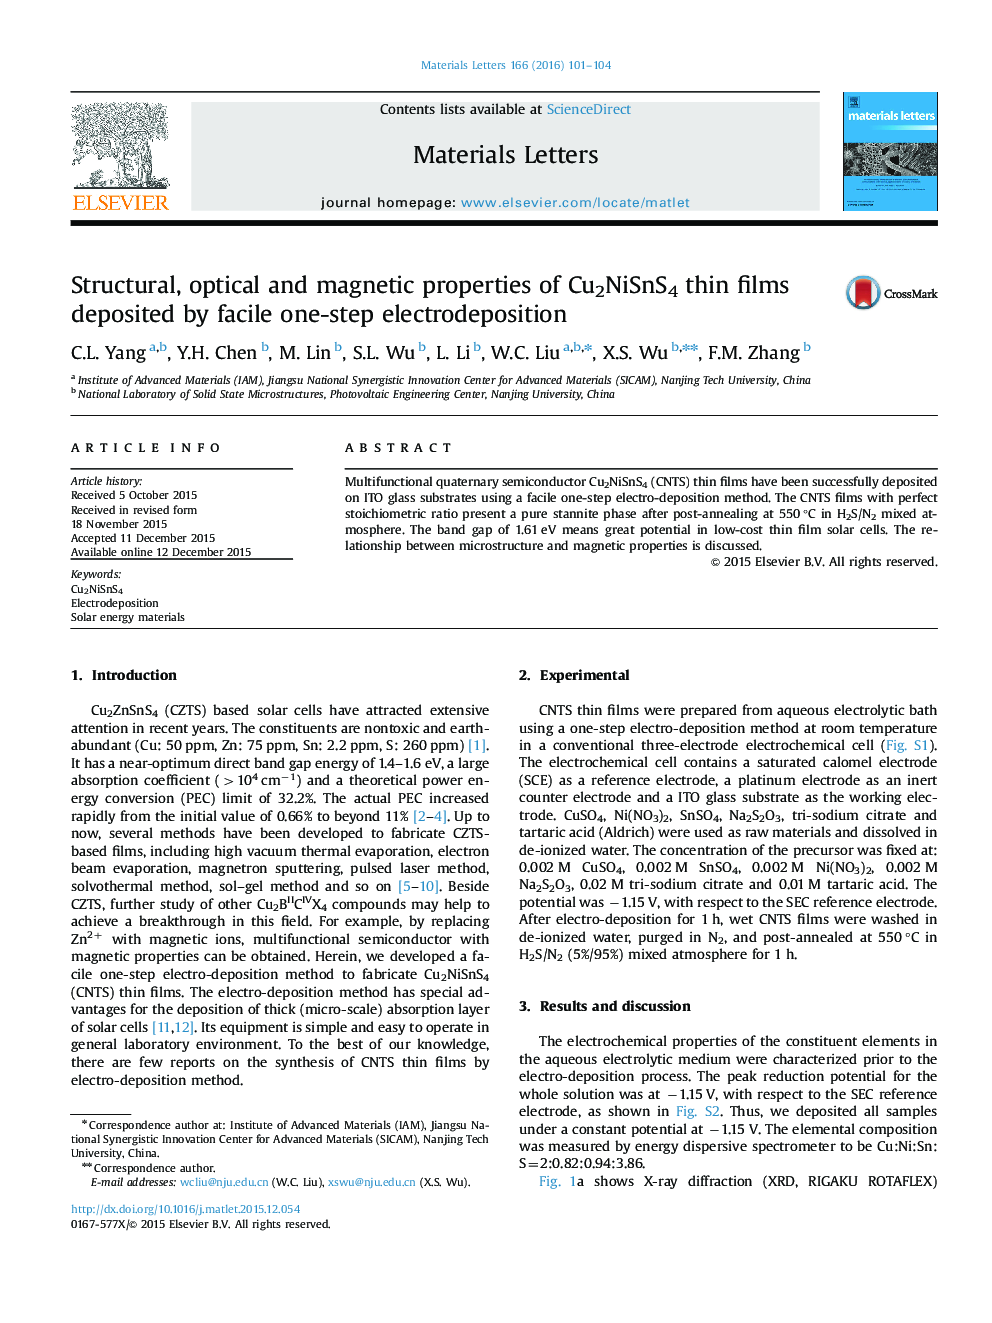 Structural, optical and magnetic properties of Cu2NiSnS4 thin films deposited by facile one-step electrodeposition